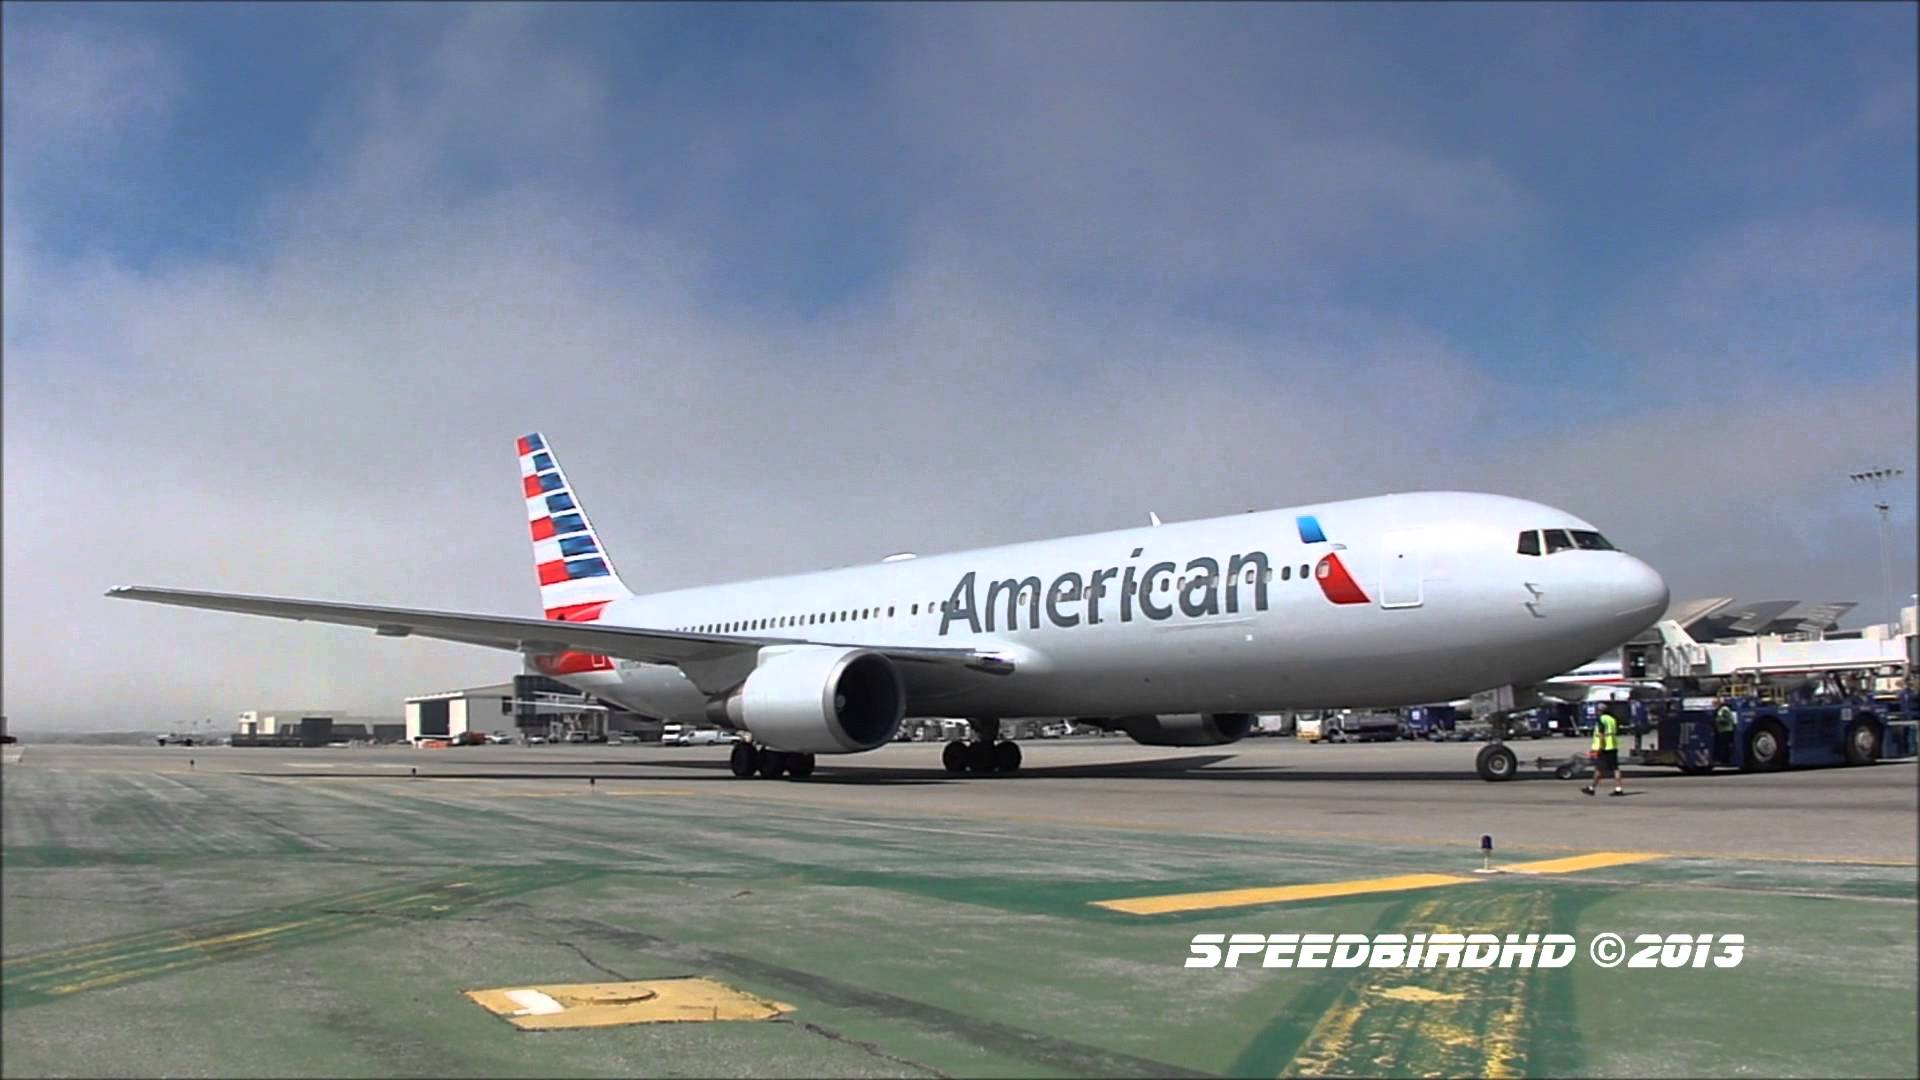 American, Airlines, Wide, High, Resolution, Wallpaper, Full, Free